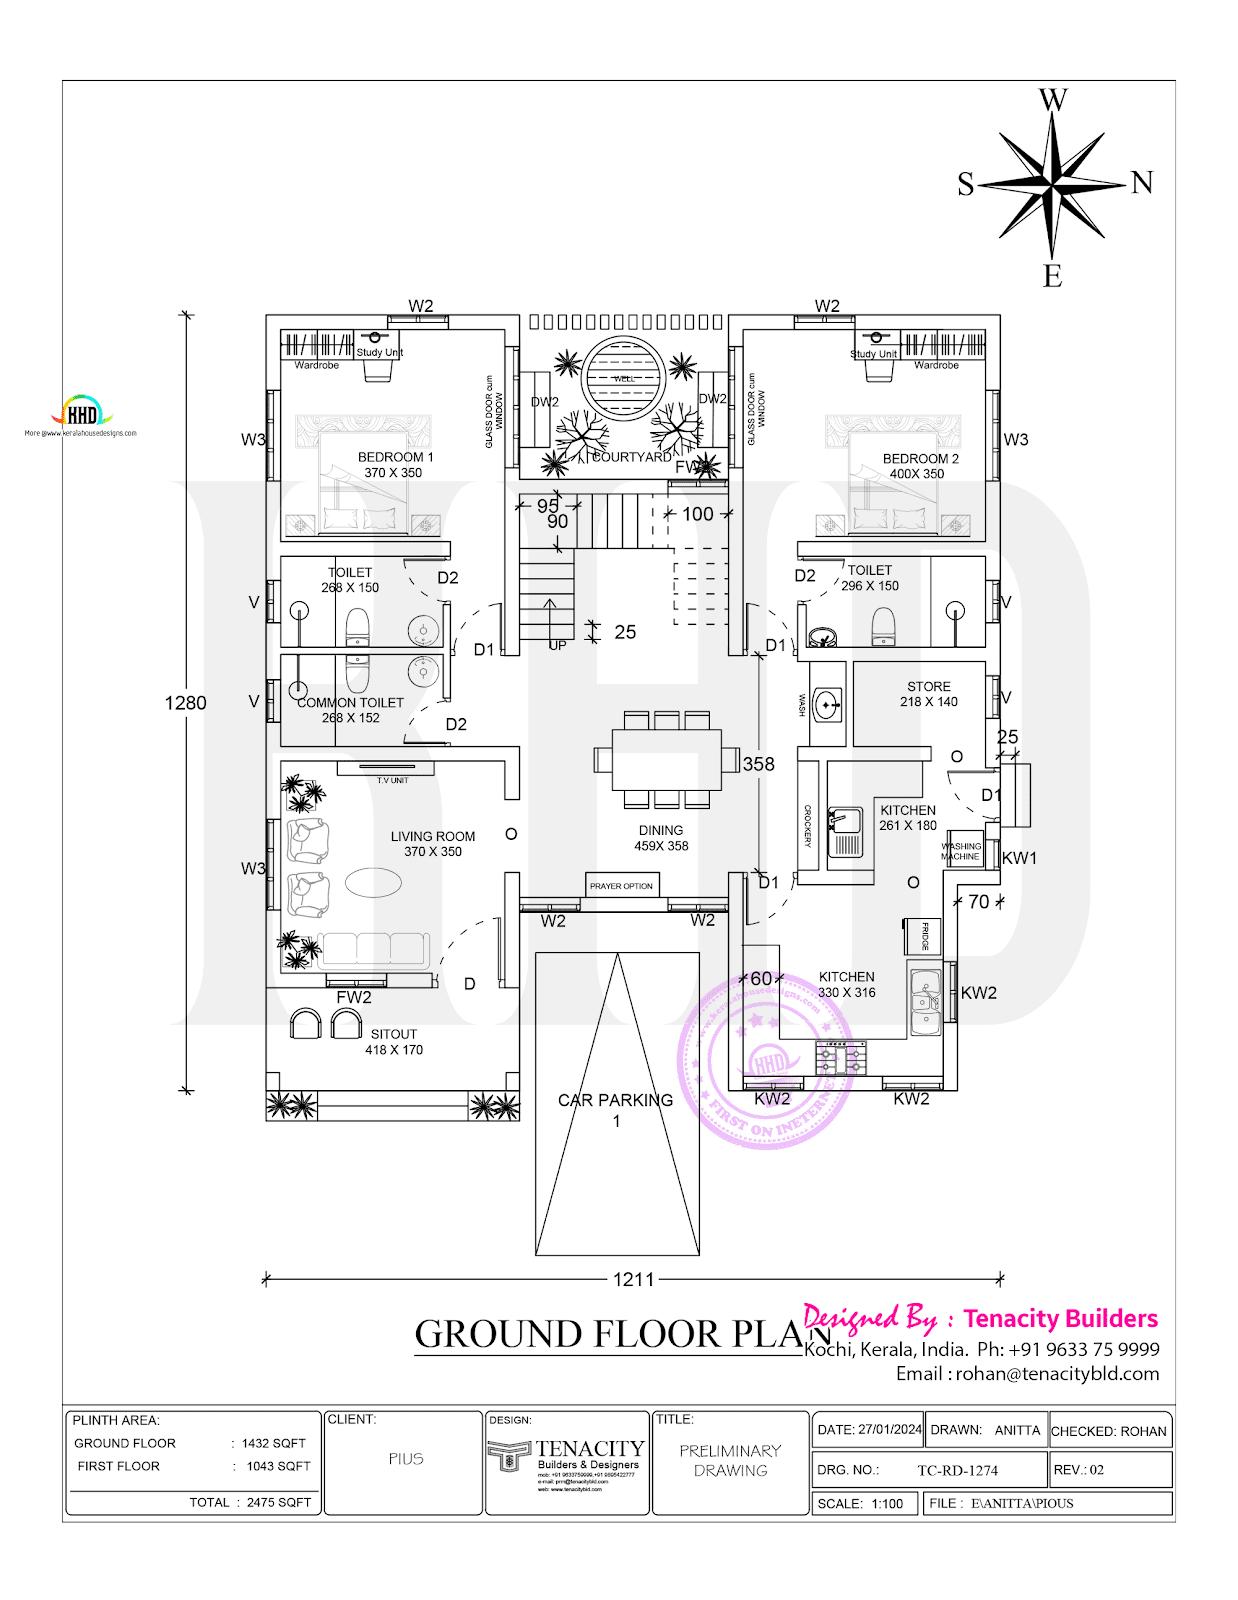 Ground Floor Plan - Architectural Drawing